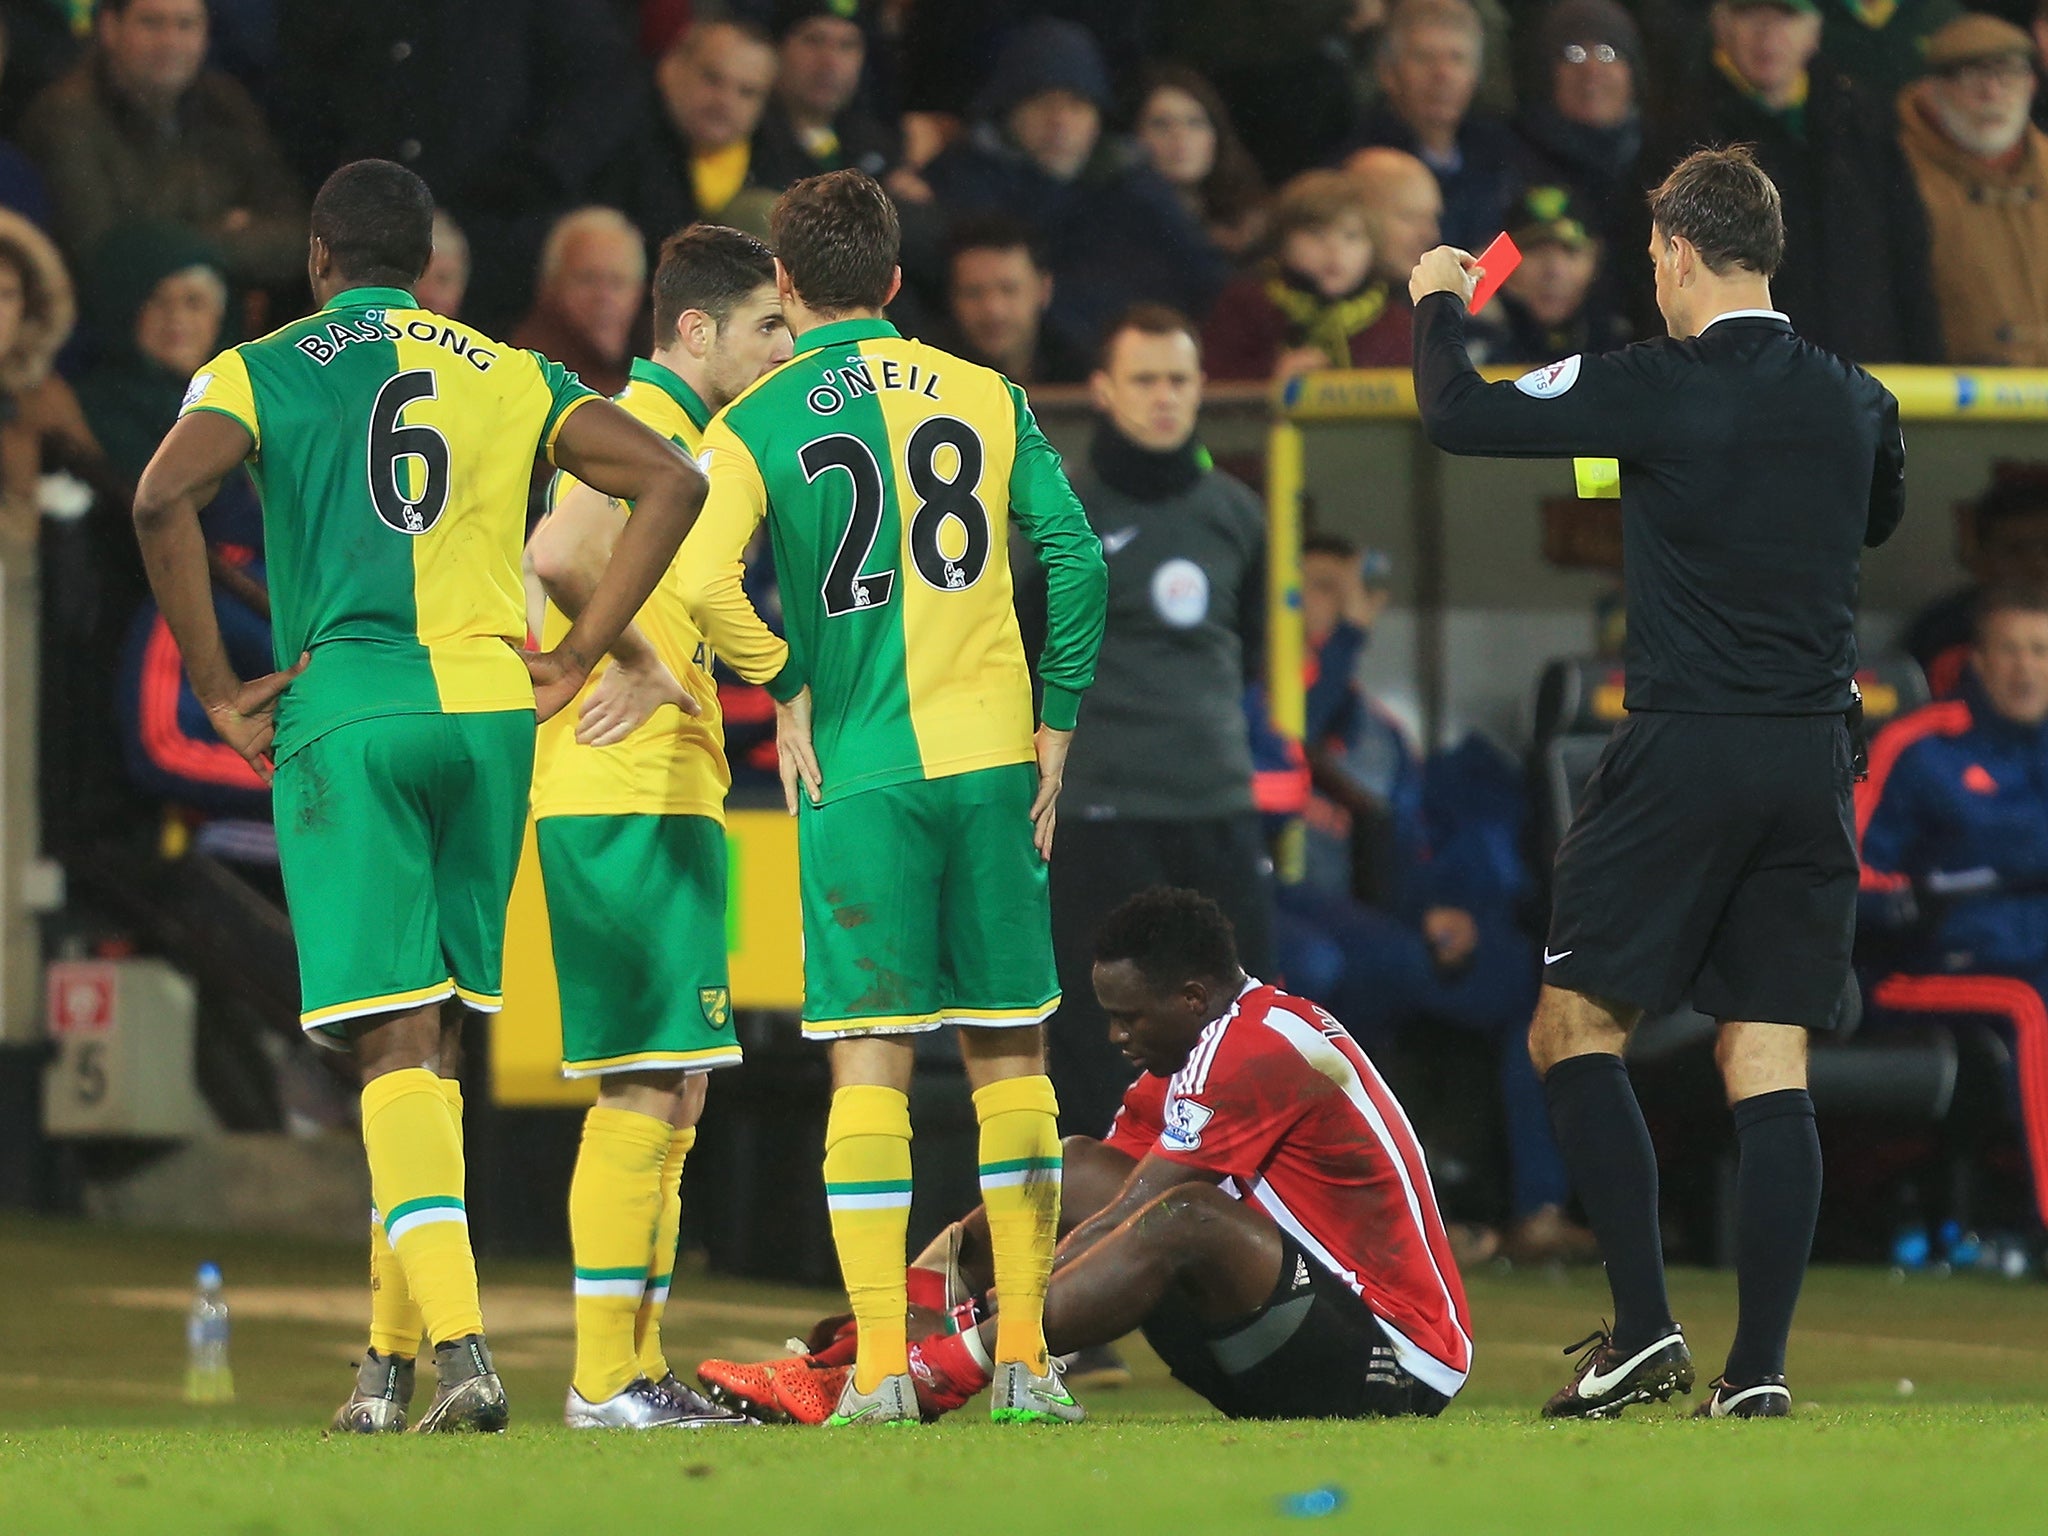 Southampton's Victor Wanyama is shown a red card by referee Mark Clattenburg